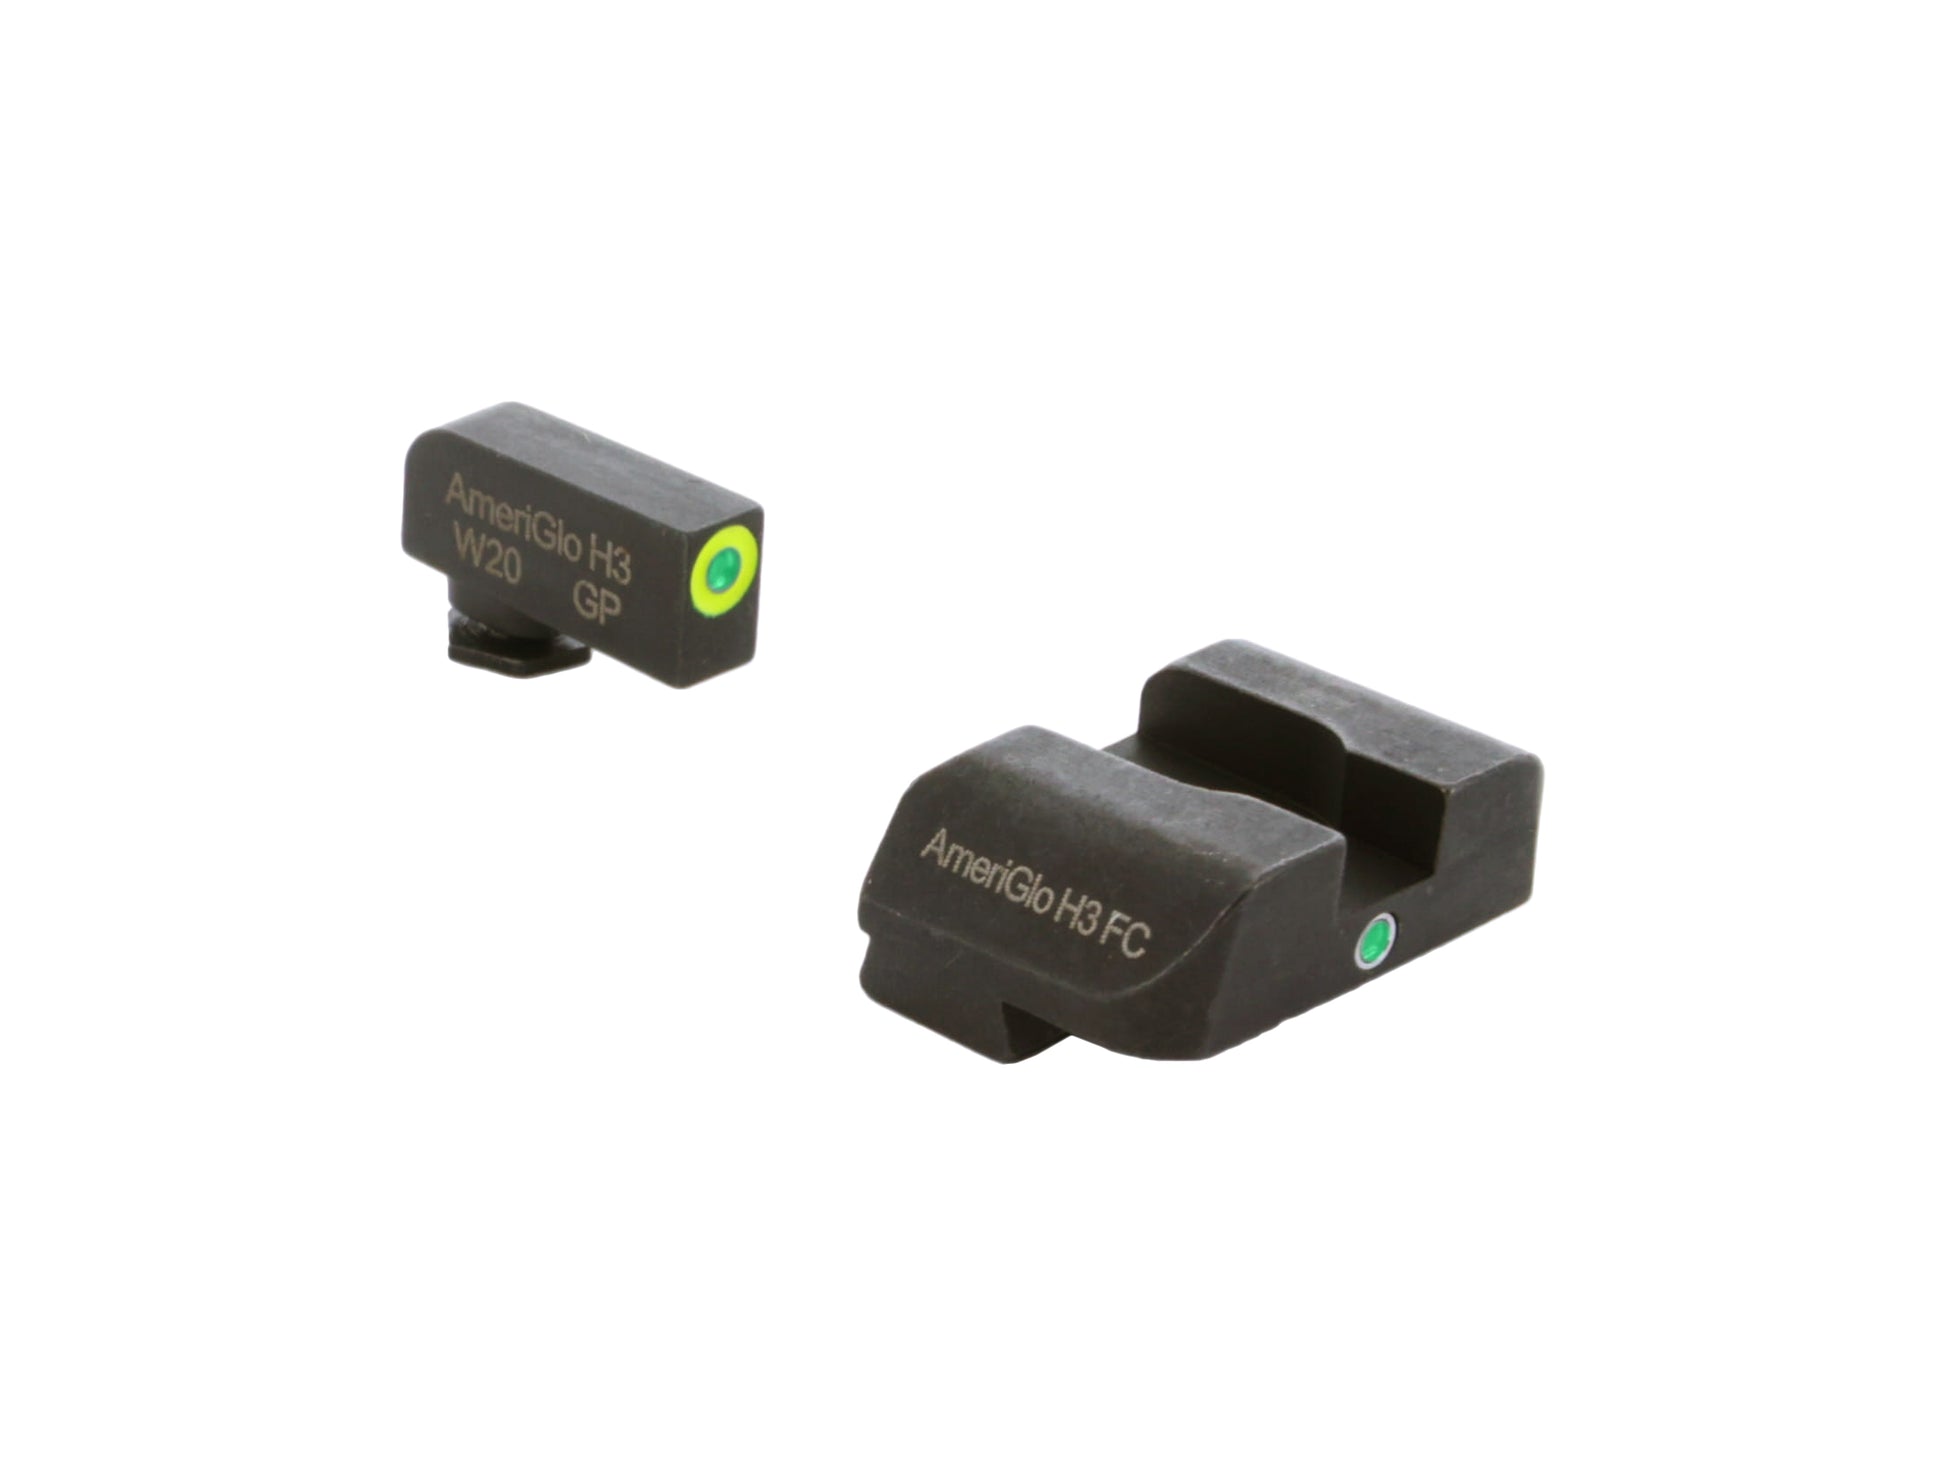 AmeriGlo Pro I-Dot Sights For Glock Gen 1-5 Green Front and Rear Sights GL-301 - California Shooting Supplies 